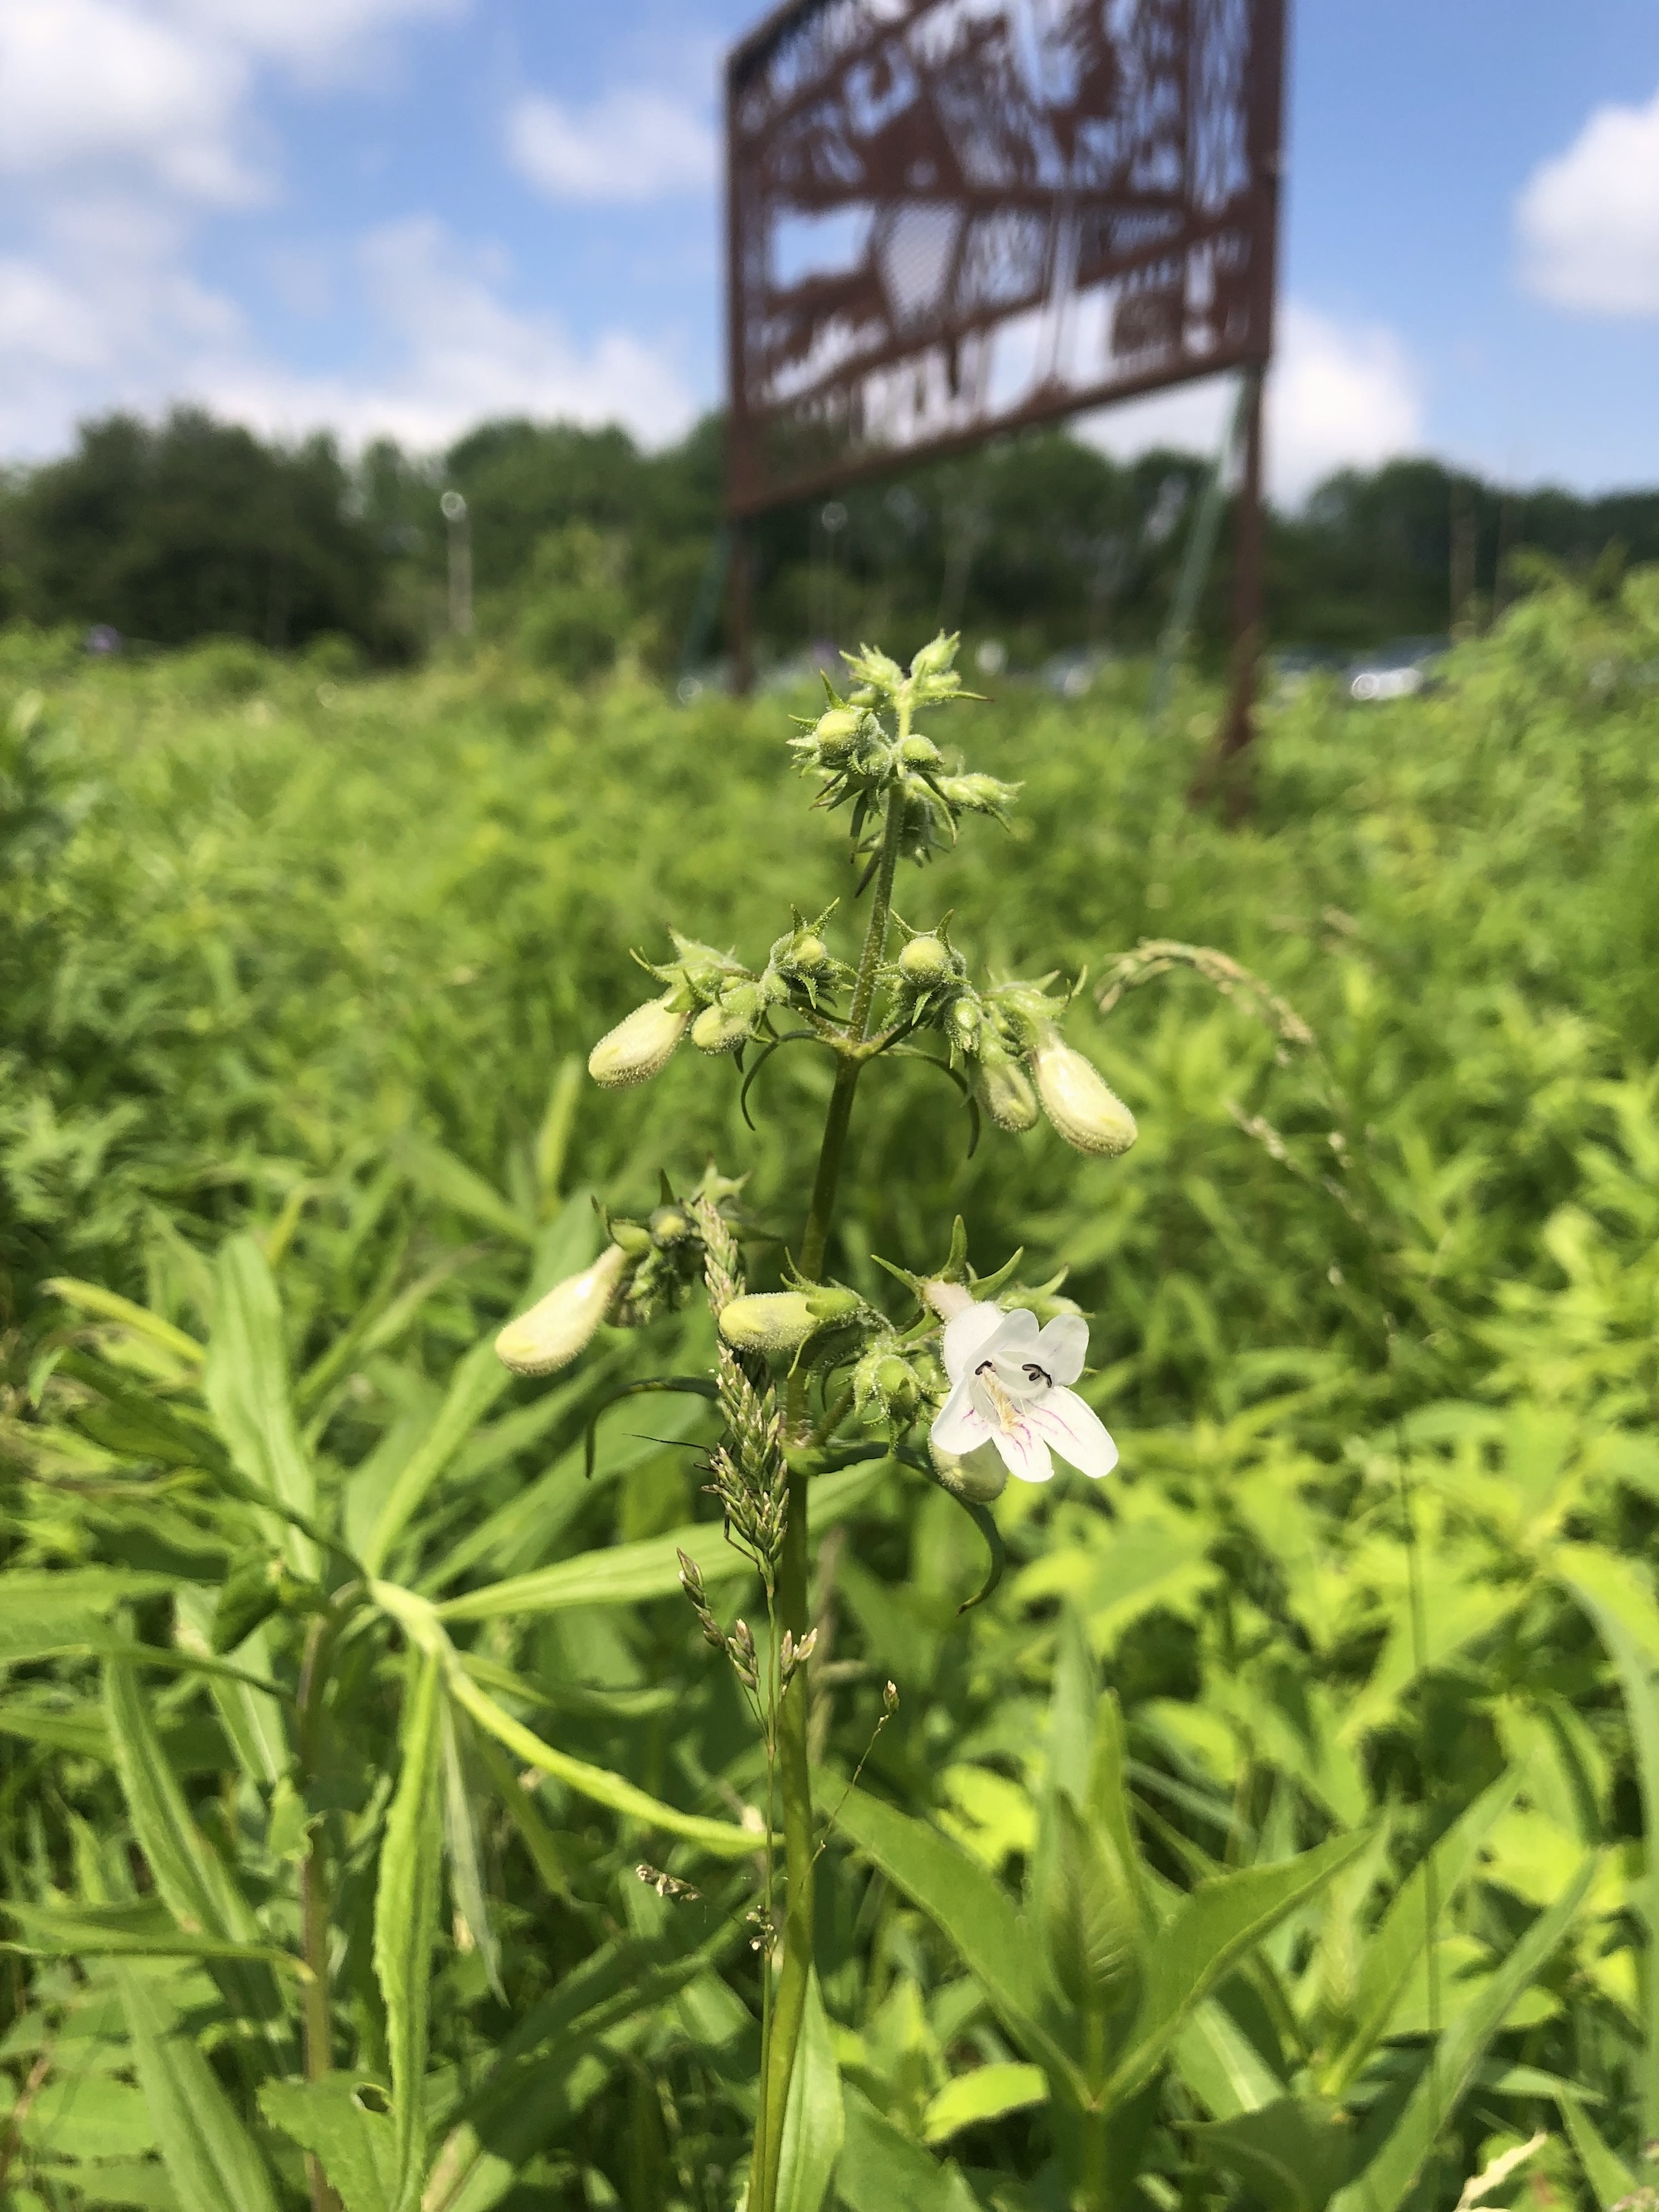 Foxglove Beardtongue in the Curtis Prairie in the University of Wisconsin-Madison Arboretum in Madison, Wisconsin on June 7, 2022.